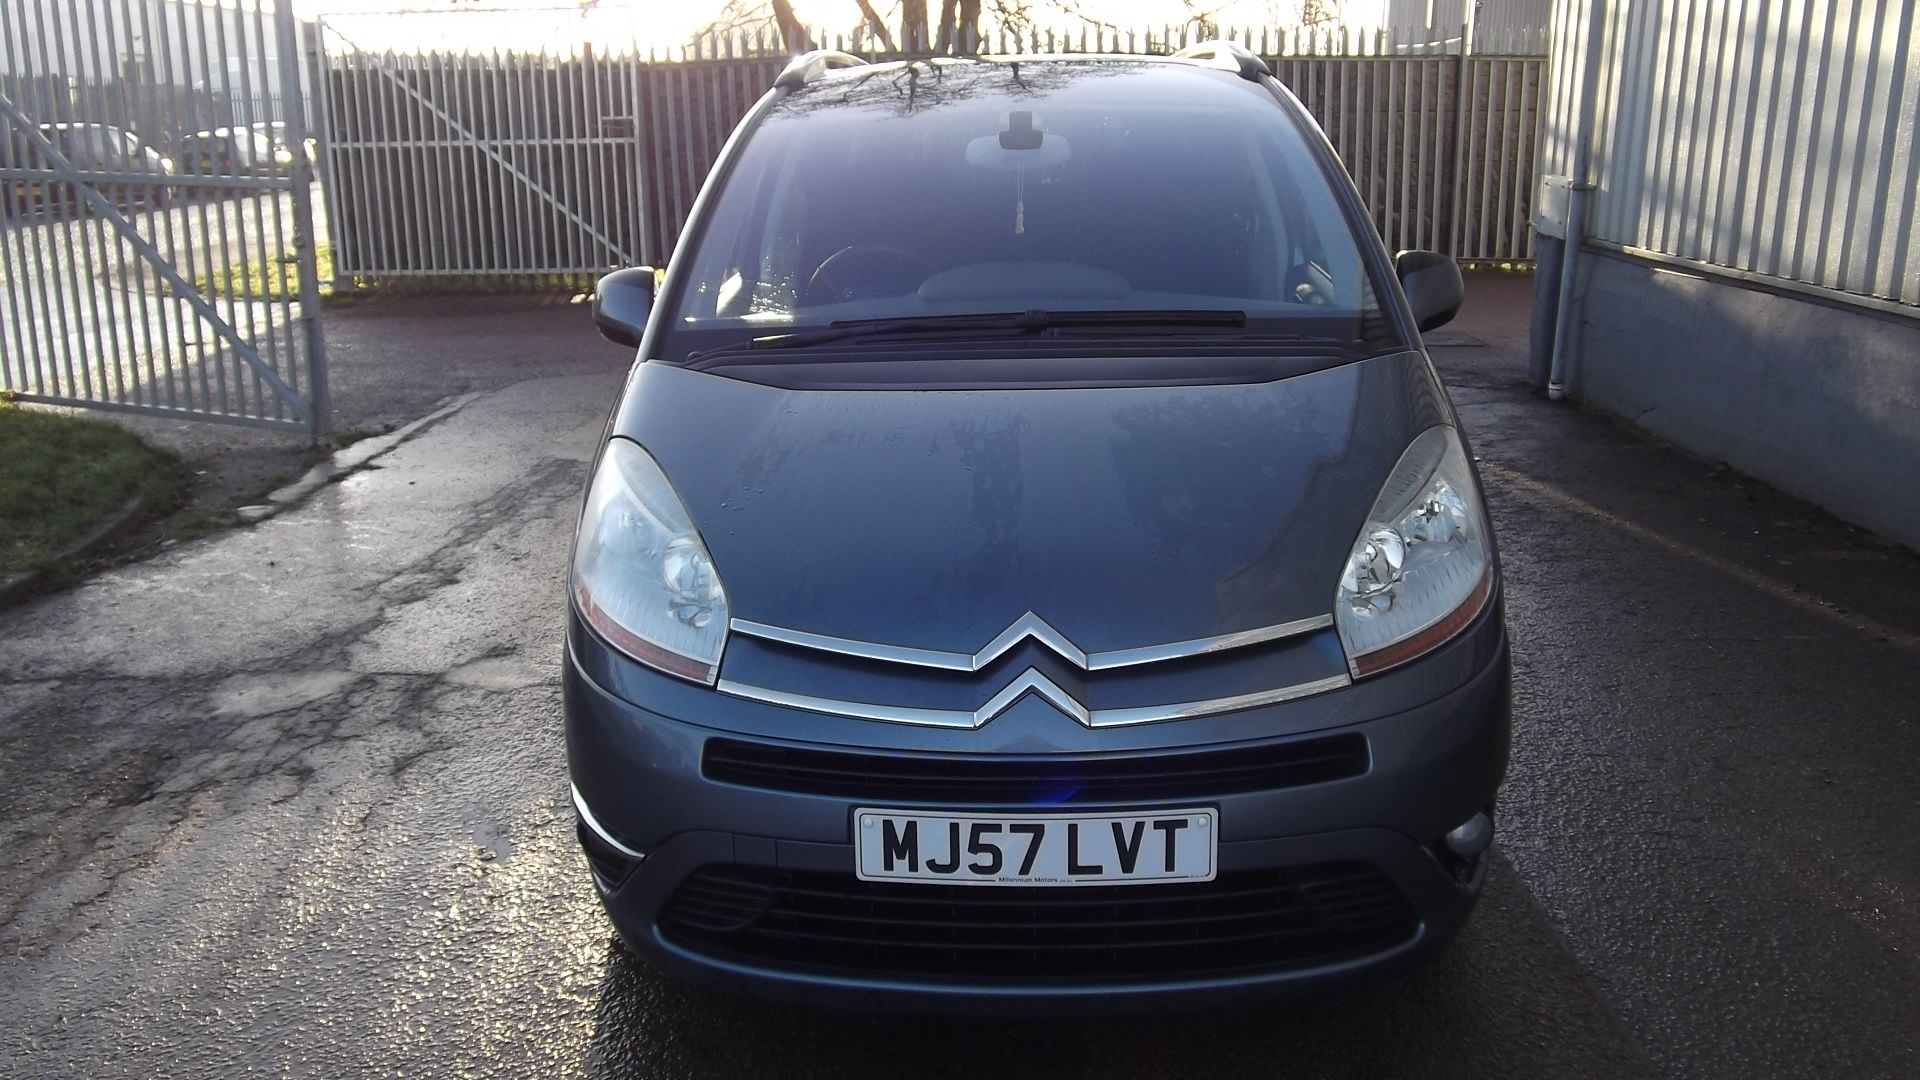 2007 Citroen C4 Picasso 7 Seater Exclusive 2.0 HDI Automatic 5 Door MPV - CL505 - NO VAT ON THE HAMM - Image 4 of 22